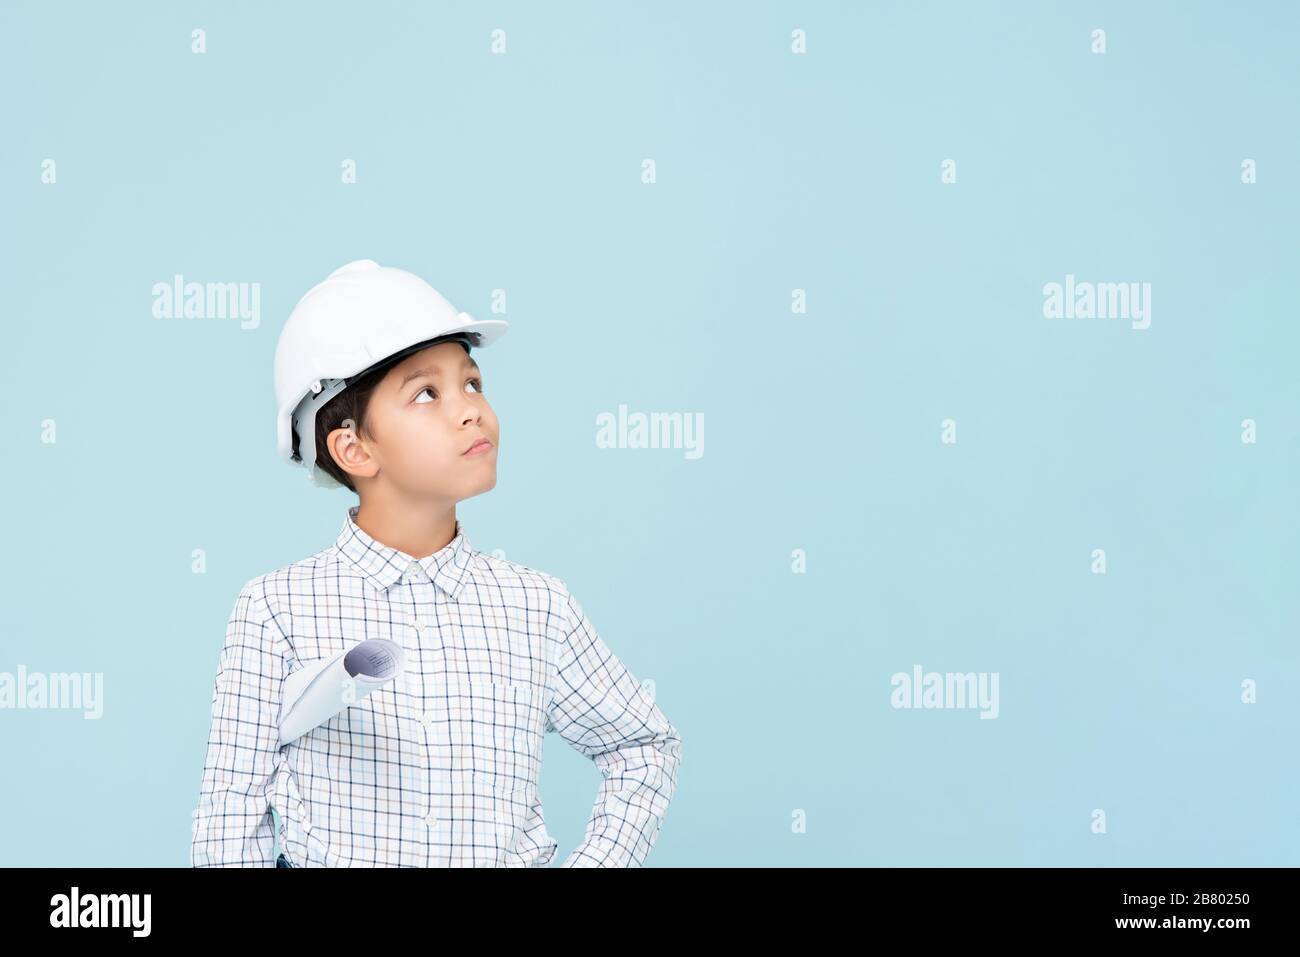 Doubt engineer boy with white helmet looking upward isolated on light blue background Stock Photo